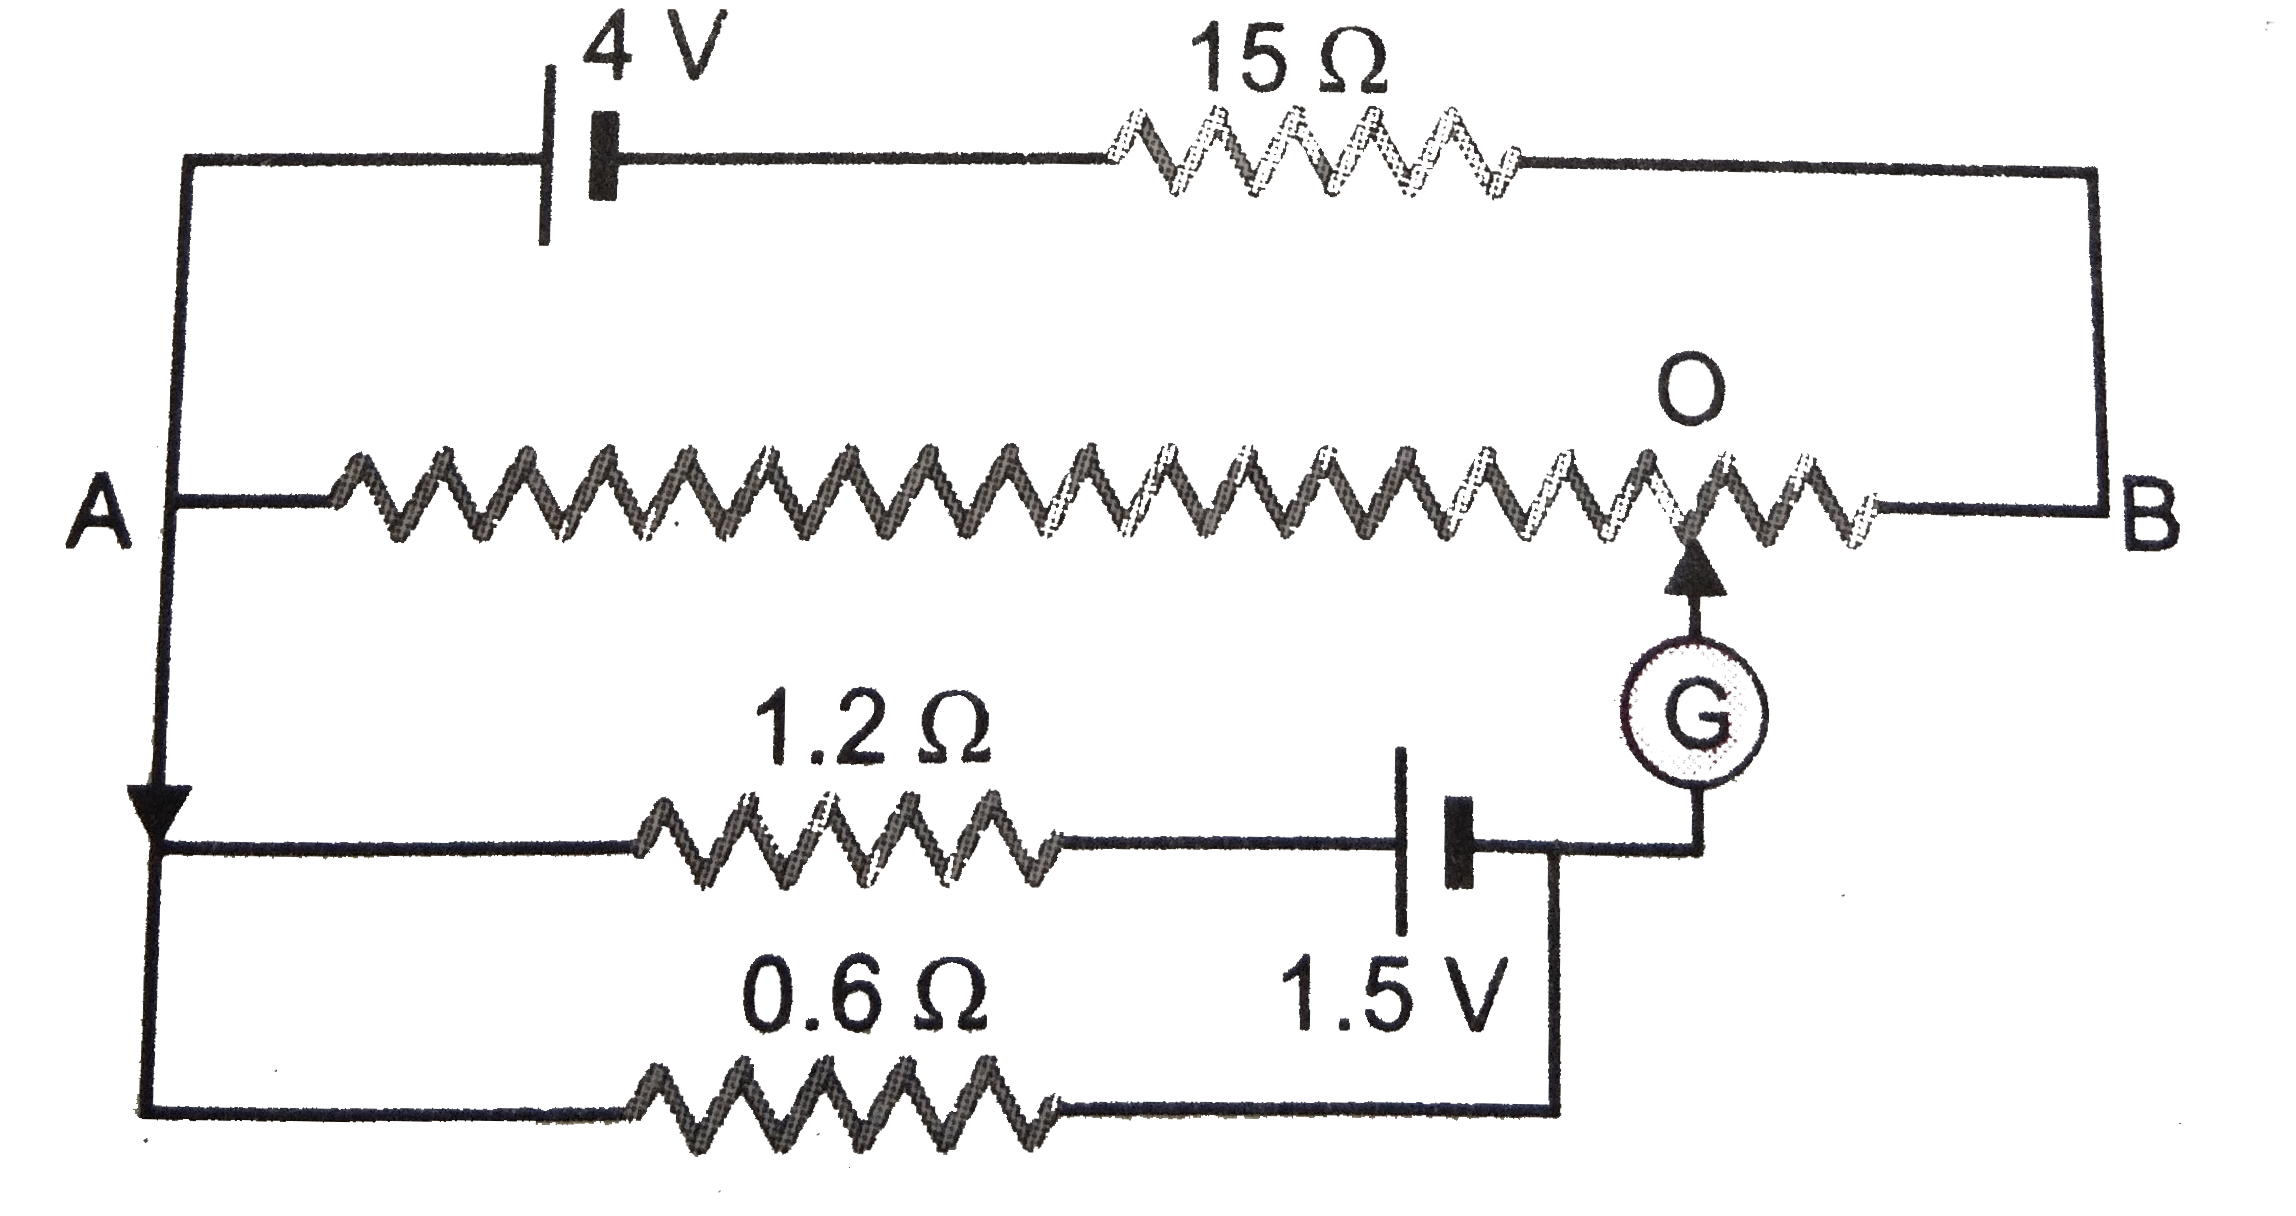 AB is 1 meter long uniform wire of 10 Omega resistance. Other data are shown in the diagram. Calculate (i) potential gradient along AB (ii) length AO when galvanometer shows no deflection